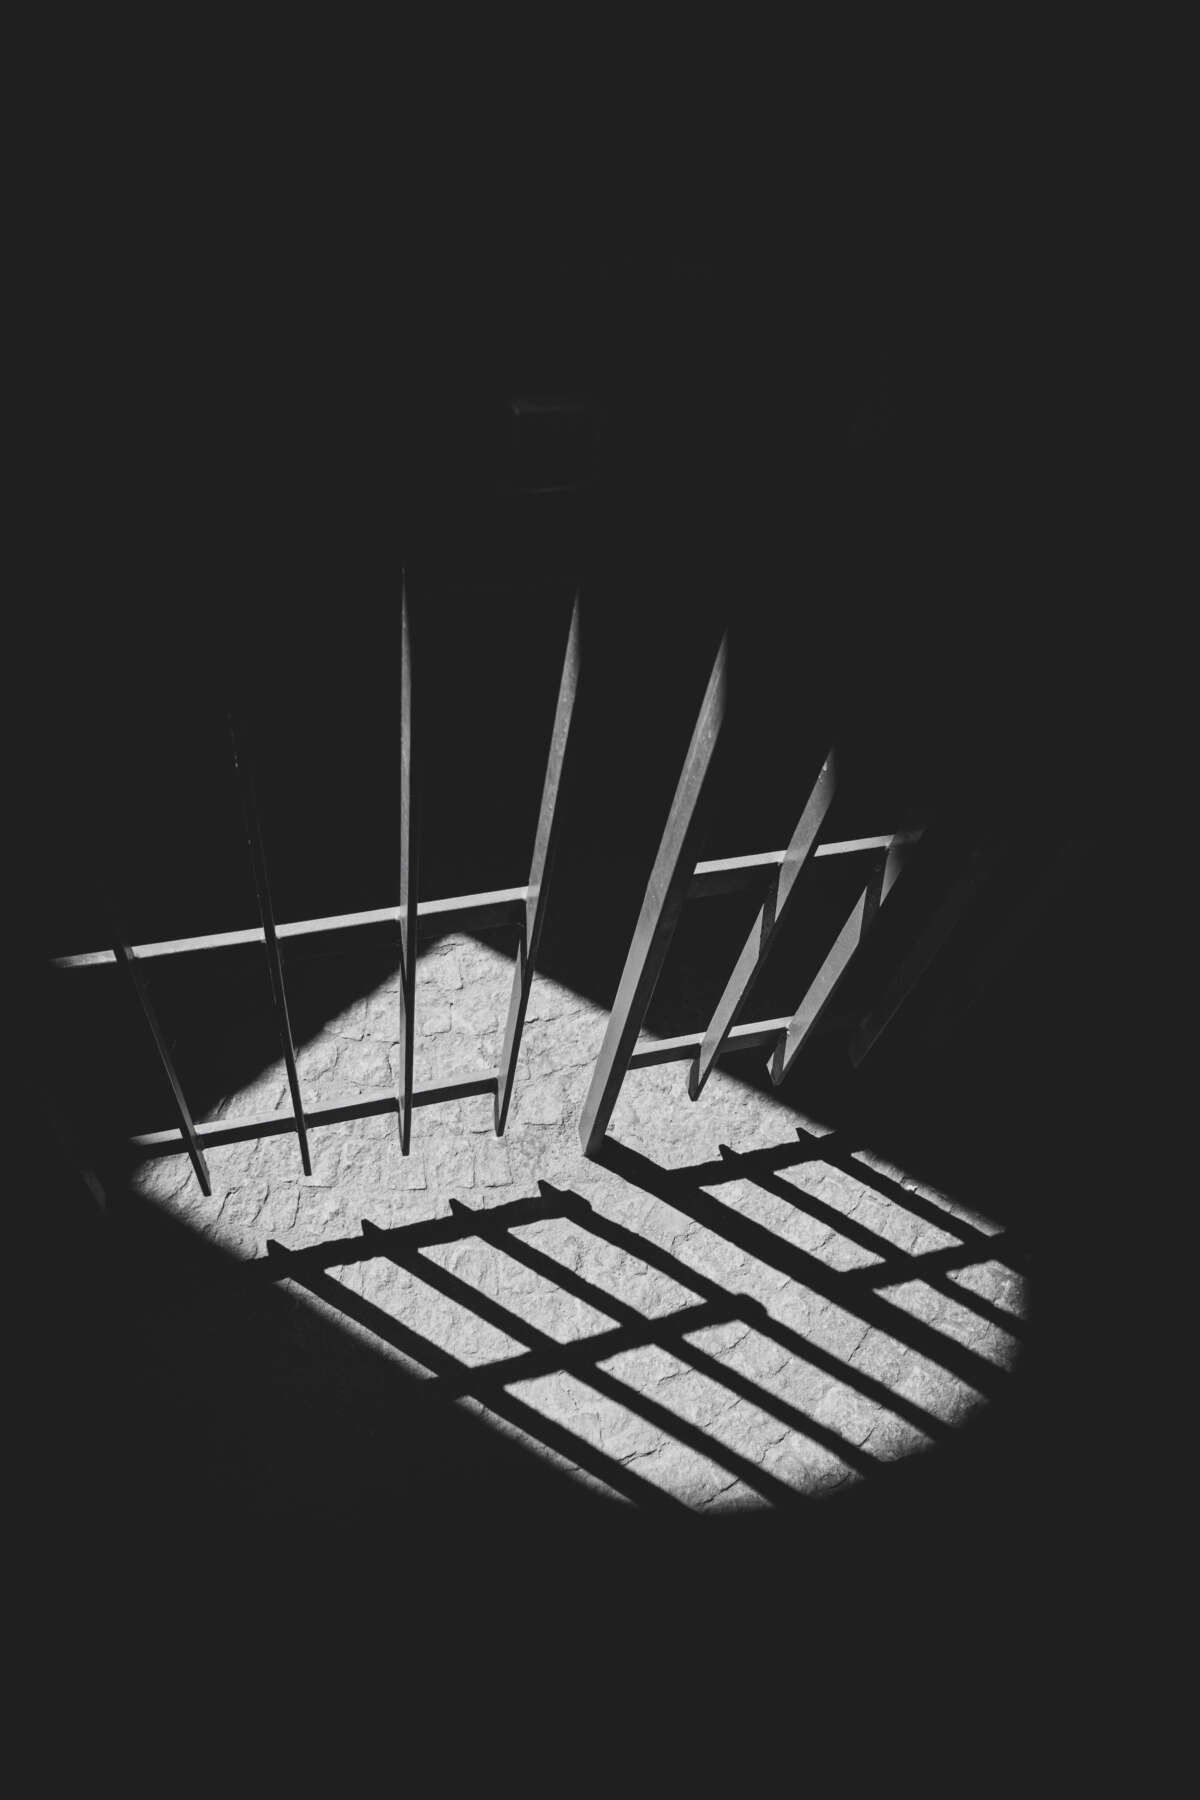 Prison bars and door under spotlight in black and white